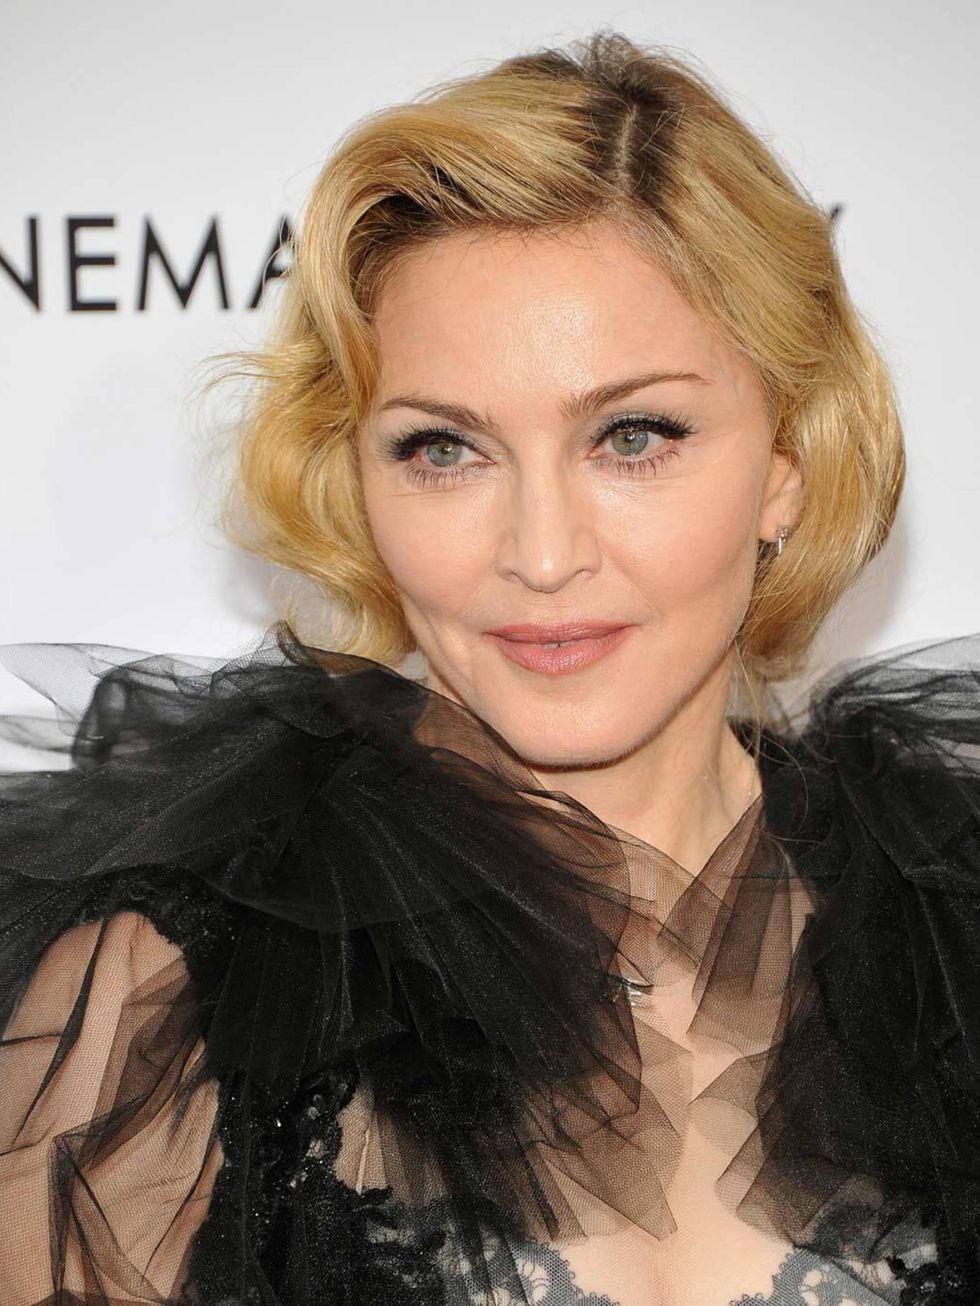 <p><strong>Madonna</strong></p><p>Queen Madonna has a ring to it.</p><p>Were confident that iconic, unstoppable <a href="http://www.elleuk.com/star-style/news/madonna-greatest-tour-looks">Madge</a> would treat running Great Britain with as much enthusias